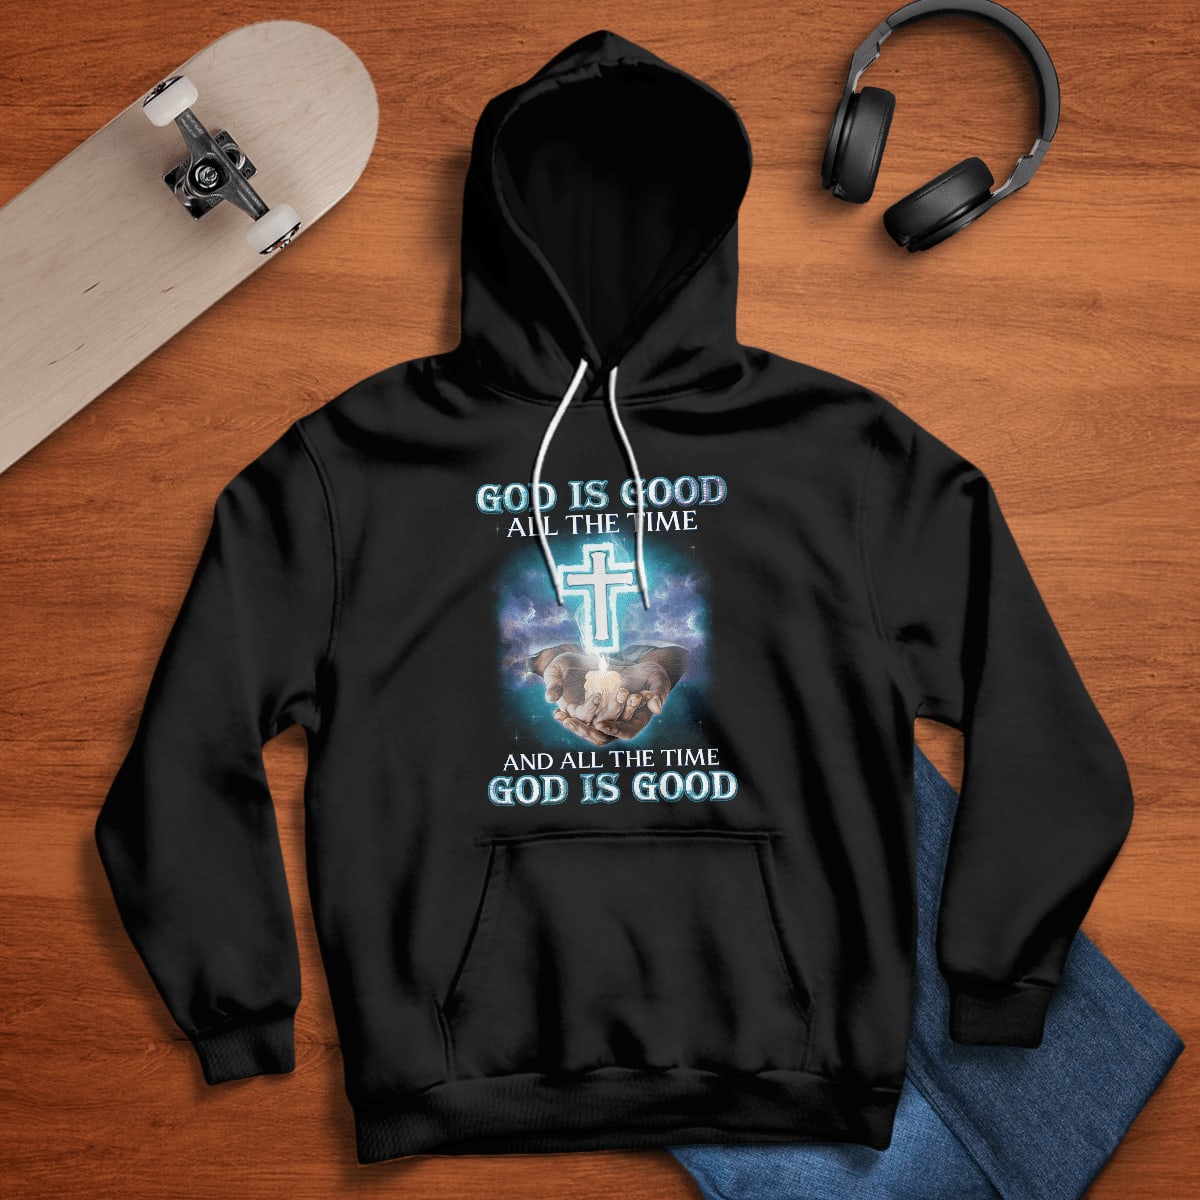 God Is Good All The Time And All The Time God Is Good T-Shirt, Jesus Sweatshirt Hoodie, Faith T-Shirt